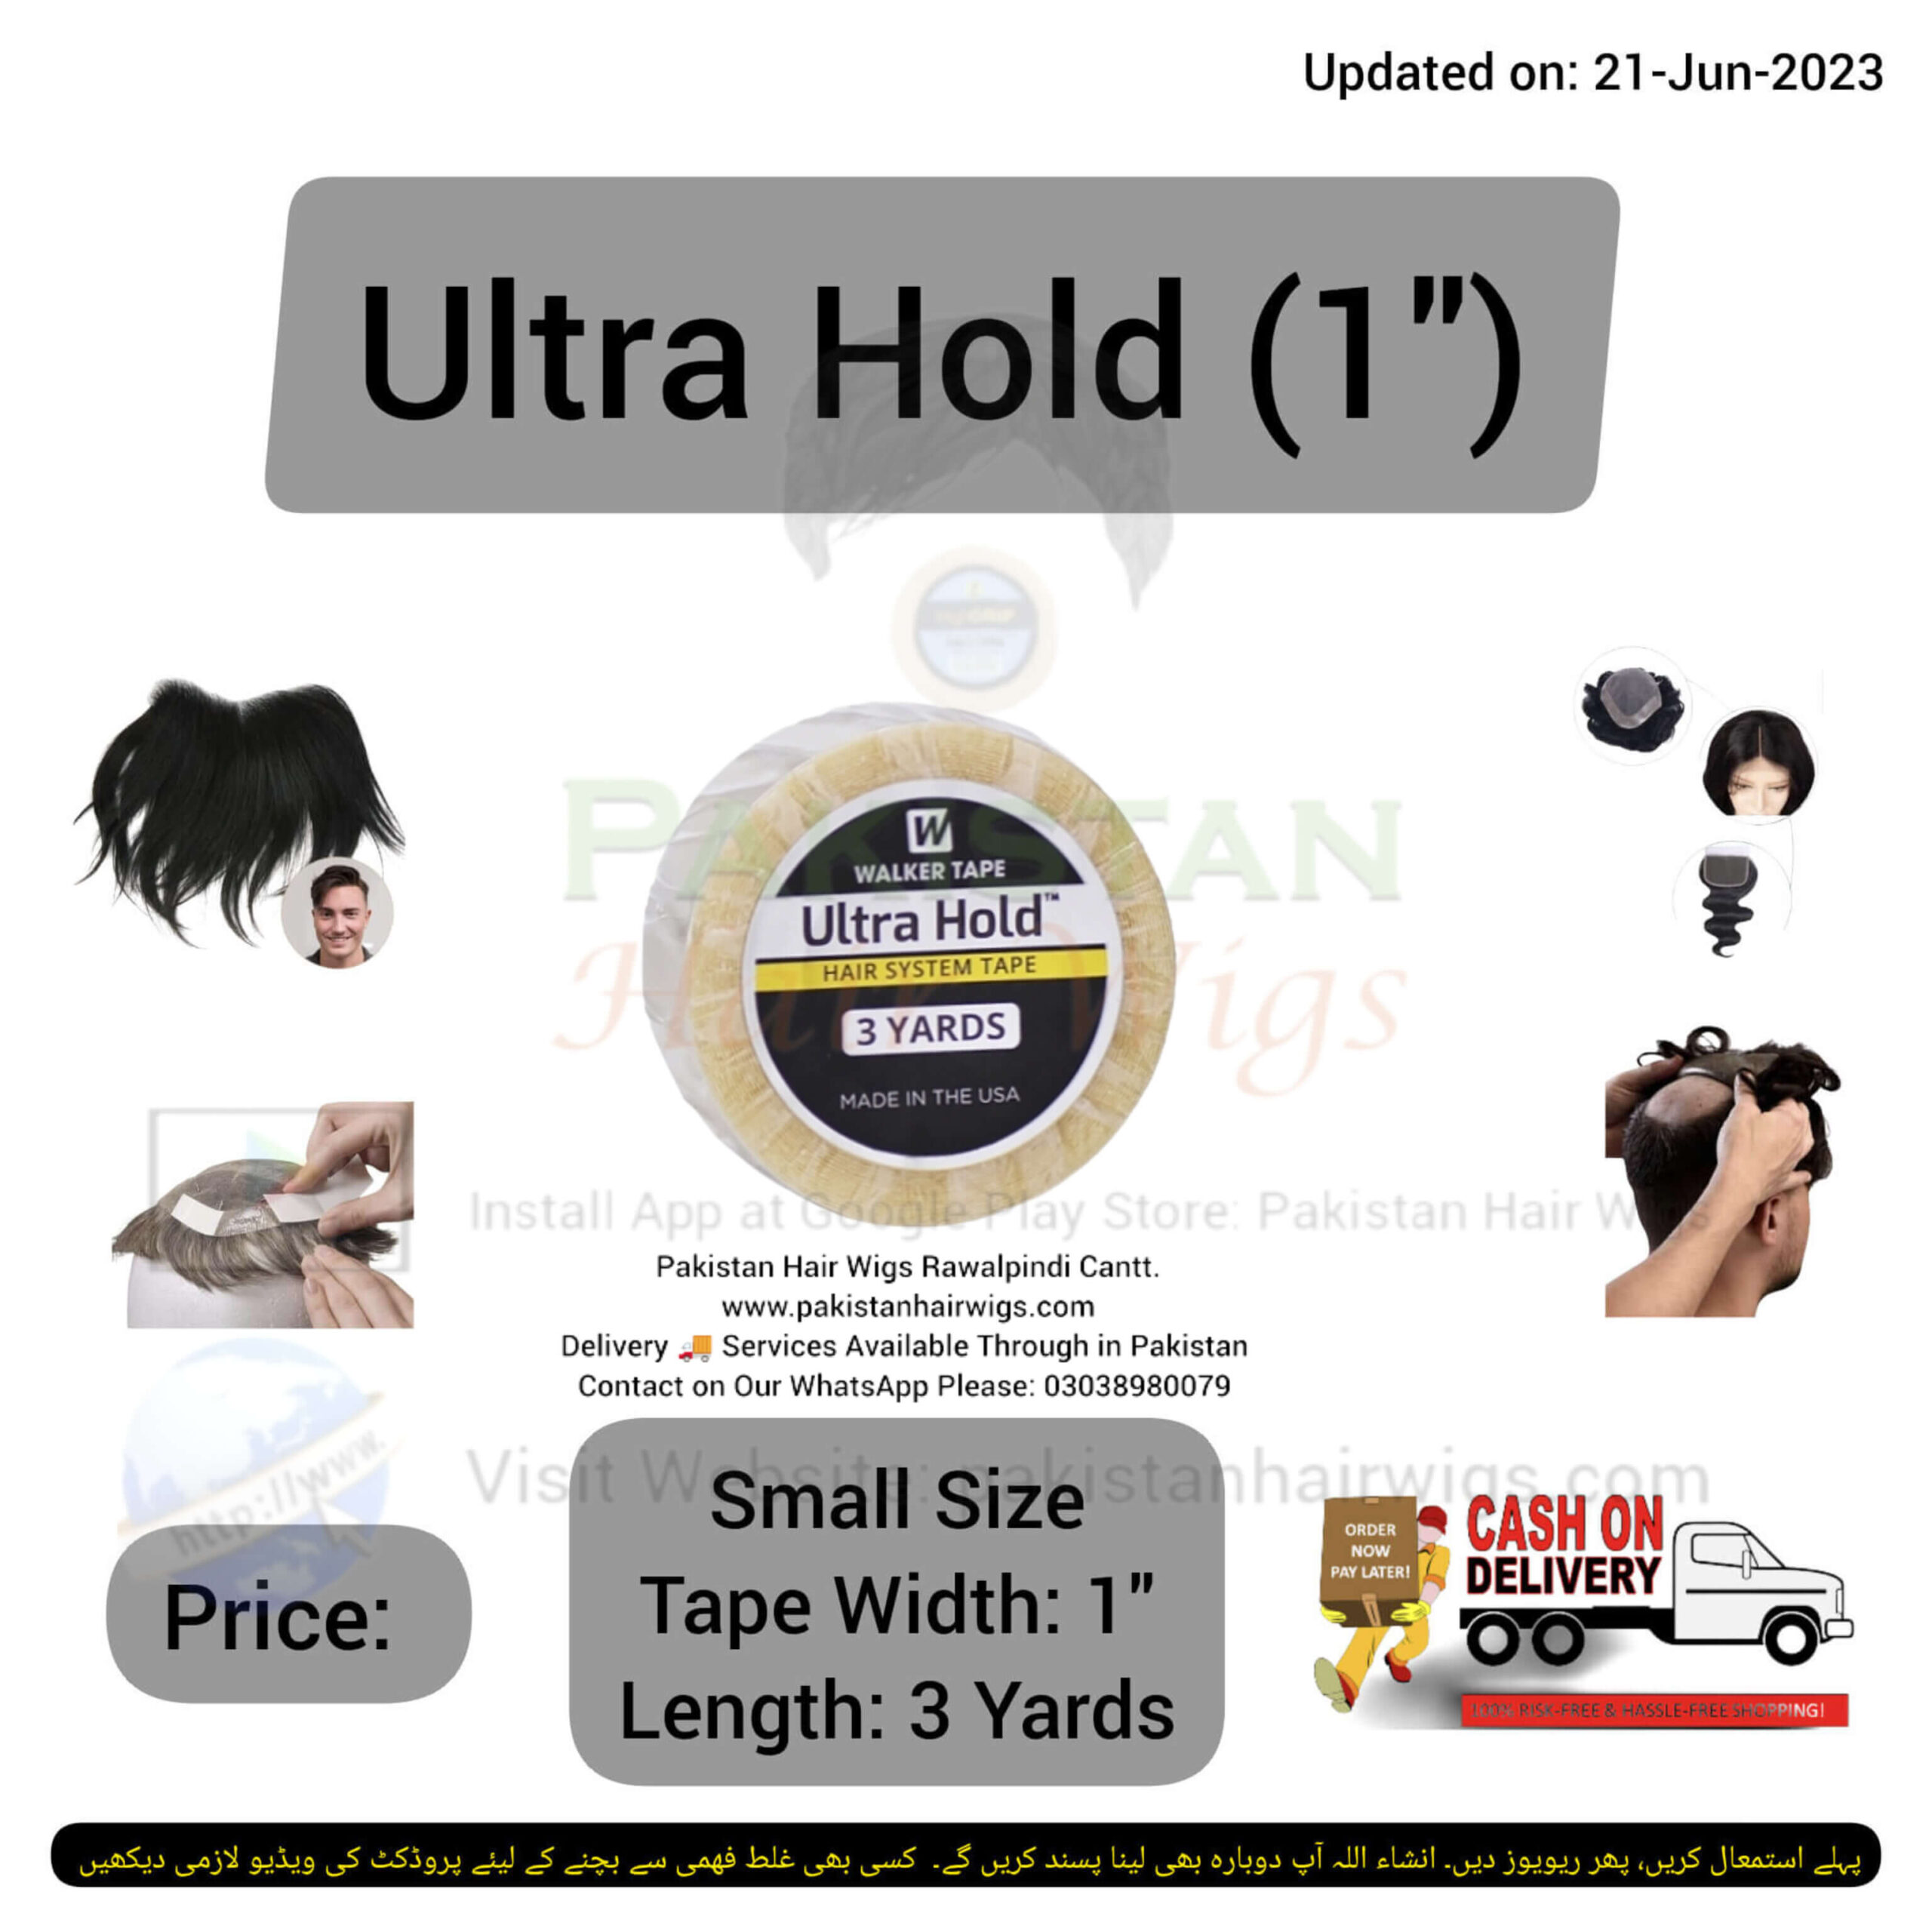 UltraHold Tape,Ultra Hold Tape, Walker's Ultra Hold Tape, Hair Wig Double Tape, b